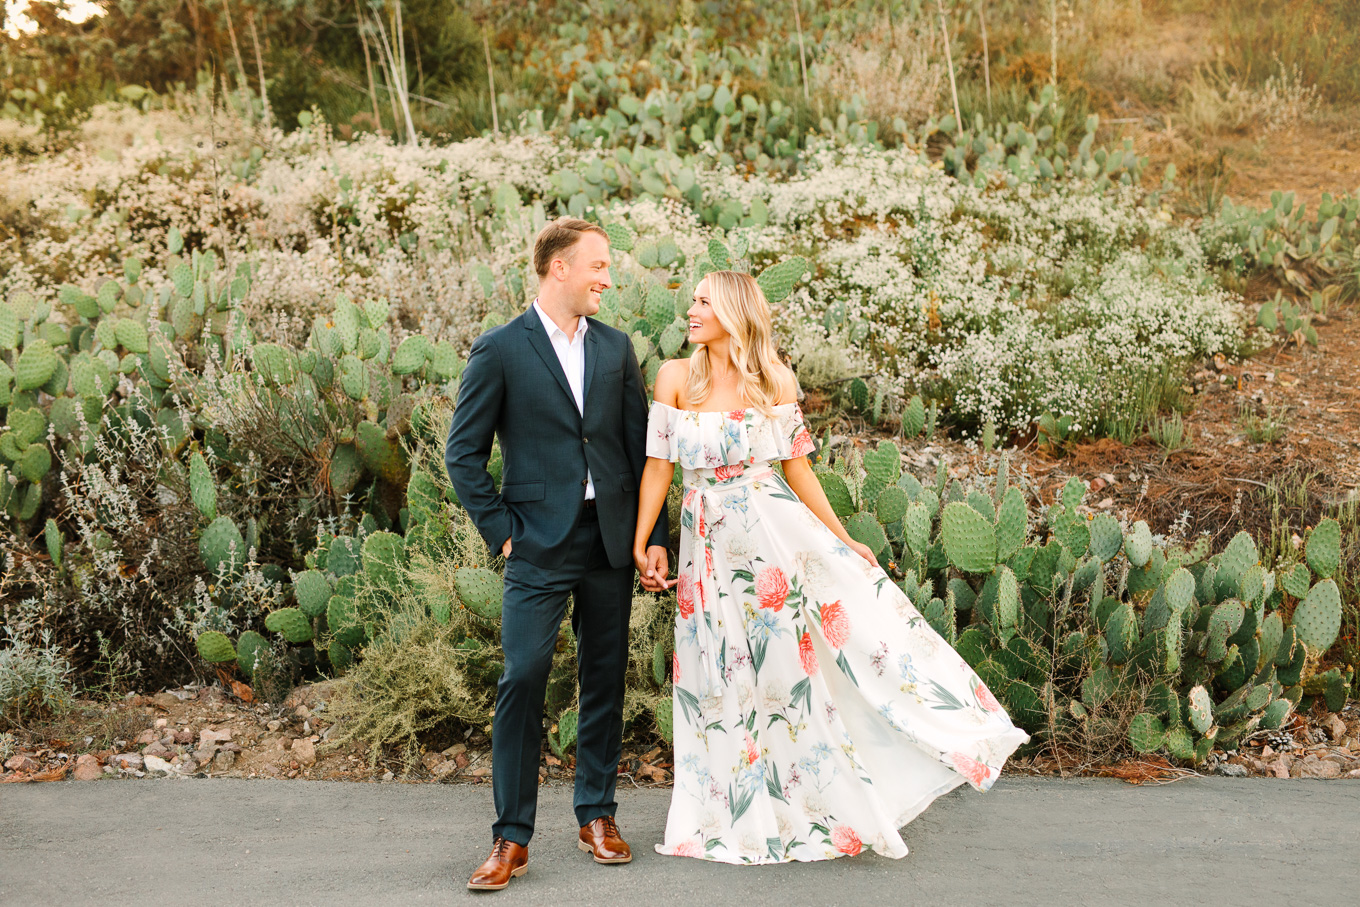 Couple in front of cacti at Quail Ranch Simi Valley | Best Southern California Garden Wedding Venues | Colorful and elevated wedding photography for fun-loving couples | #gardenvenue #weddingvenue #socalweddingvenue #bouquetideas #uniquebouquet   Source: Mary Costa Photography | Los Angeles 